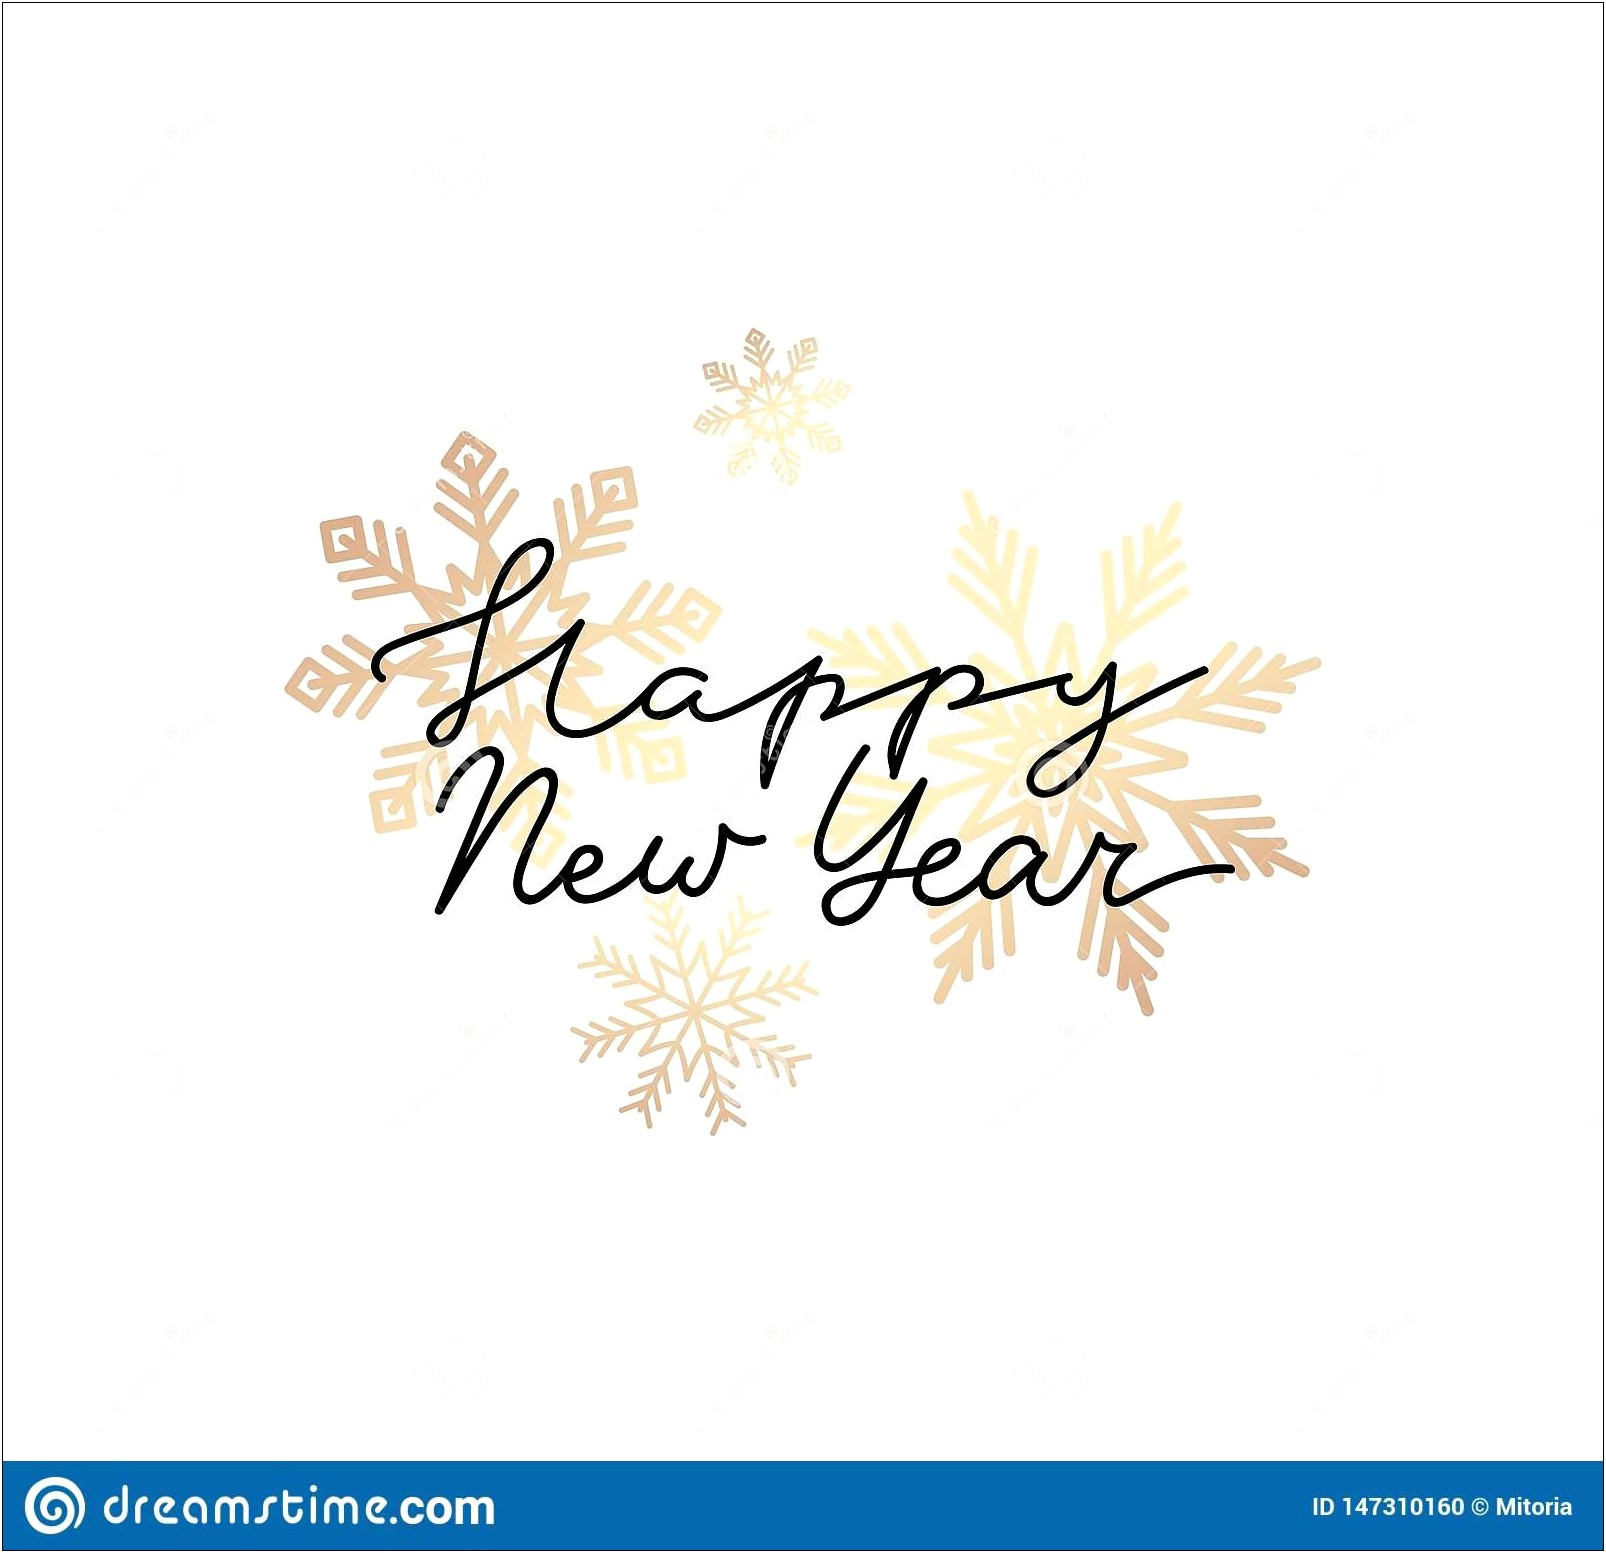 New Year Card Greetings Free Template White Background